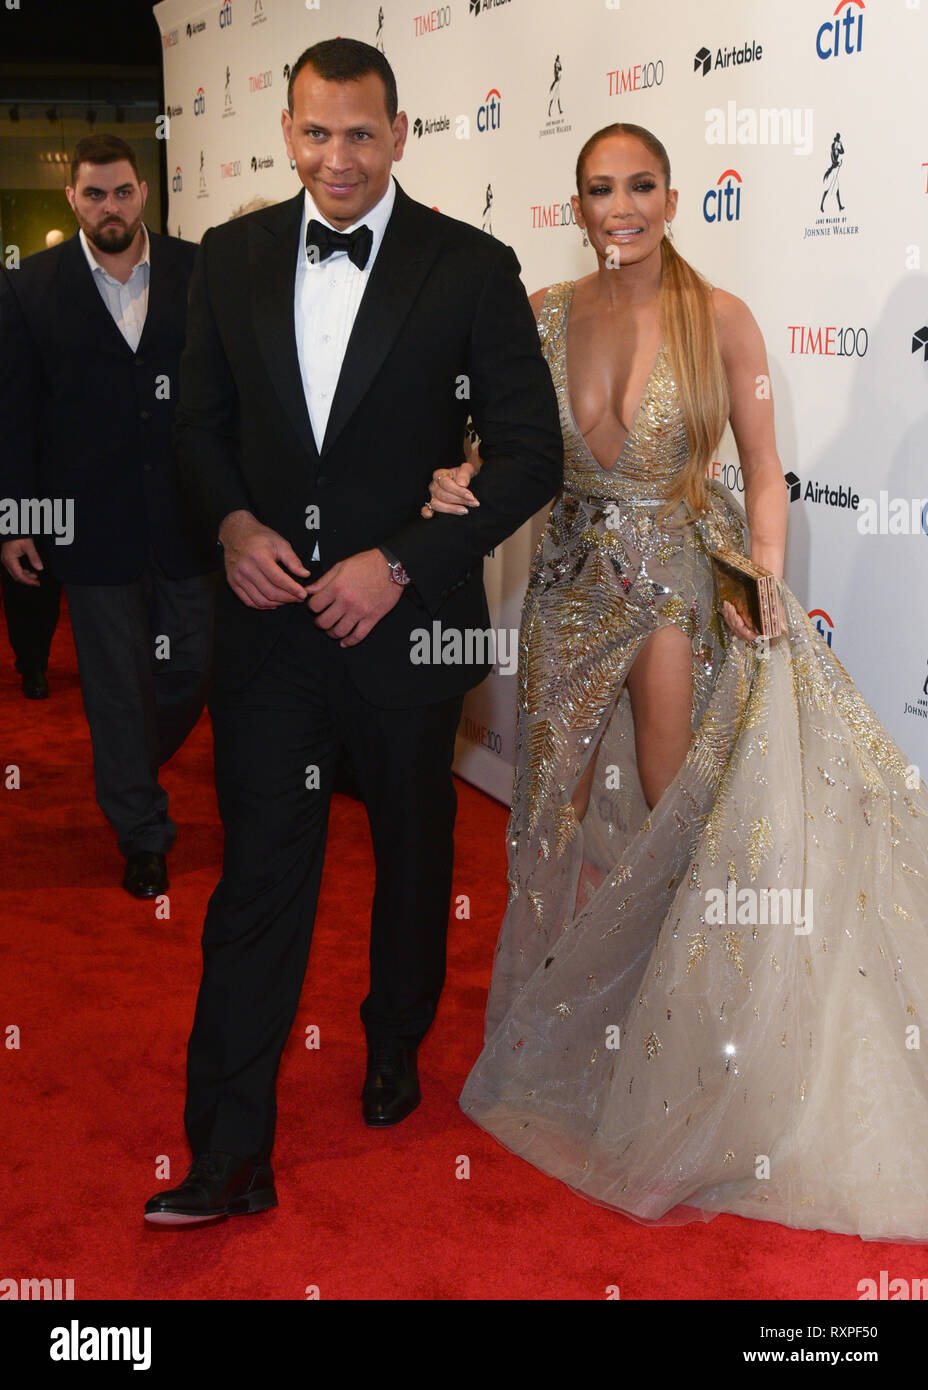 Alex Rodriguez and Jennifer Lopez attend the 2018 Time 100 Gala at Jazz at Lincoln Center on April 24, 2018 in New York City. Stock Photo